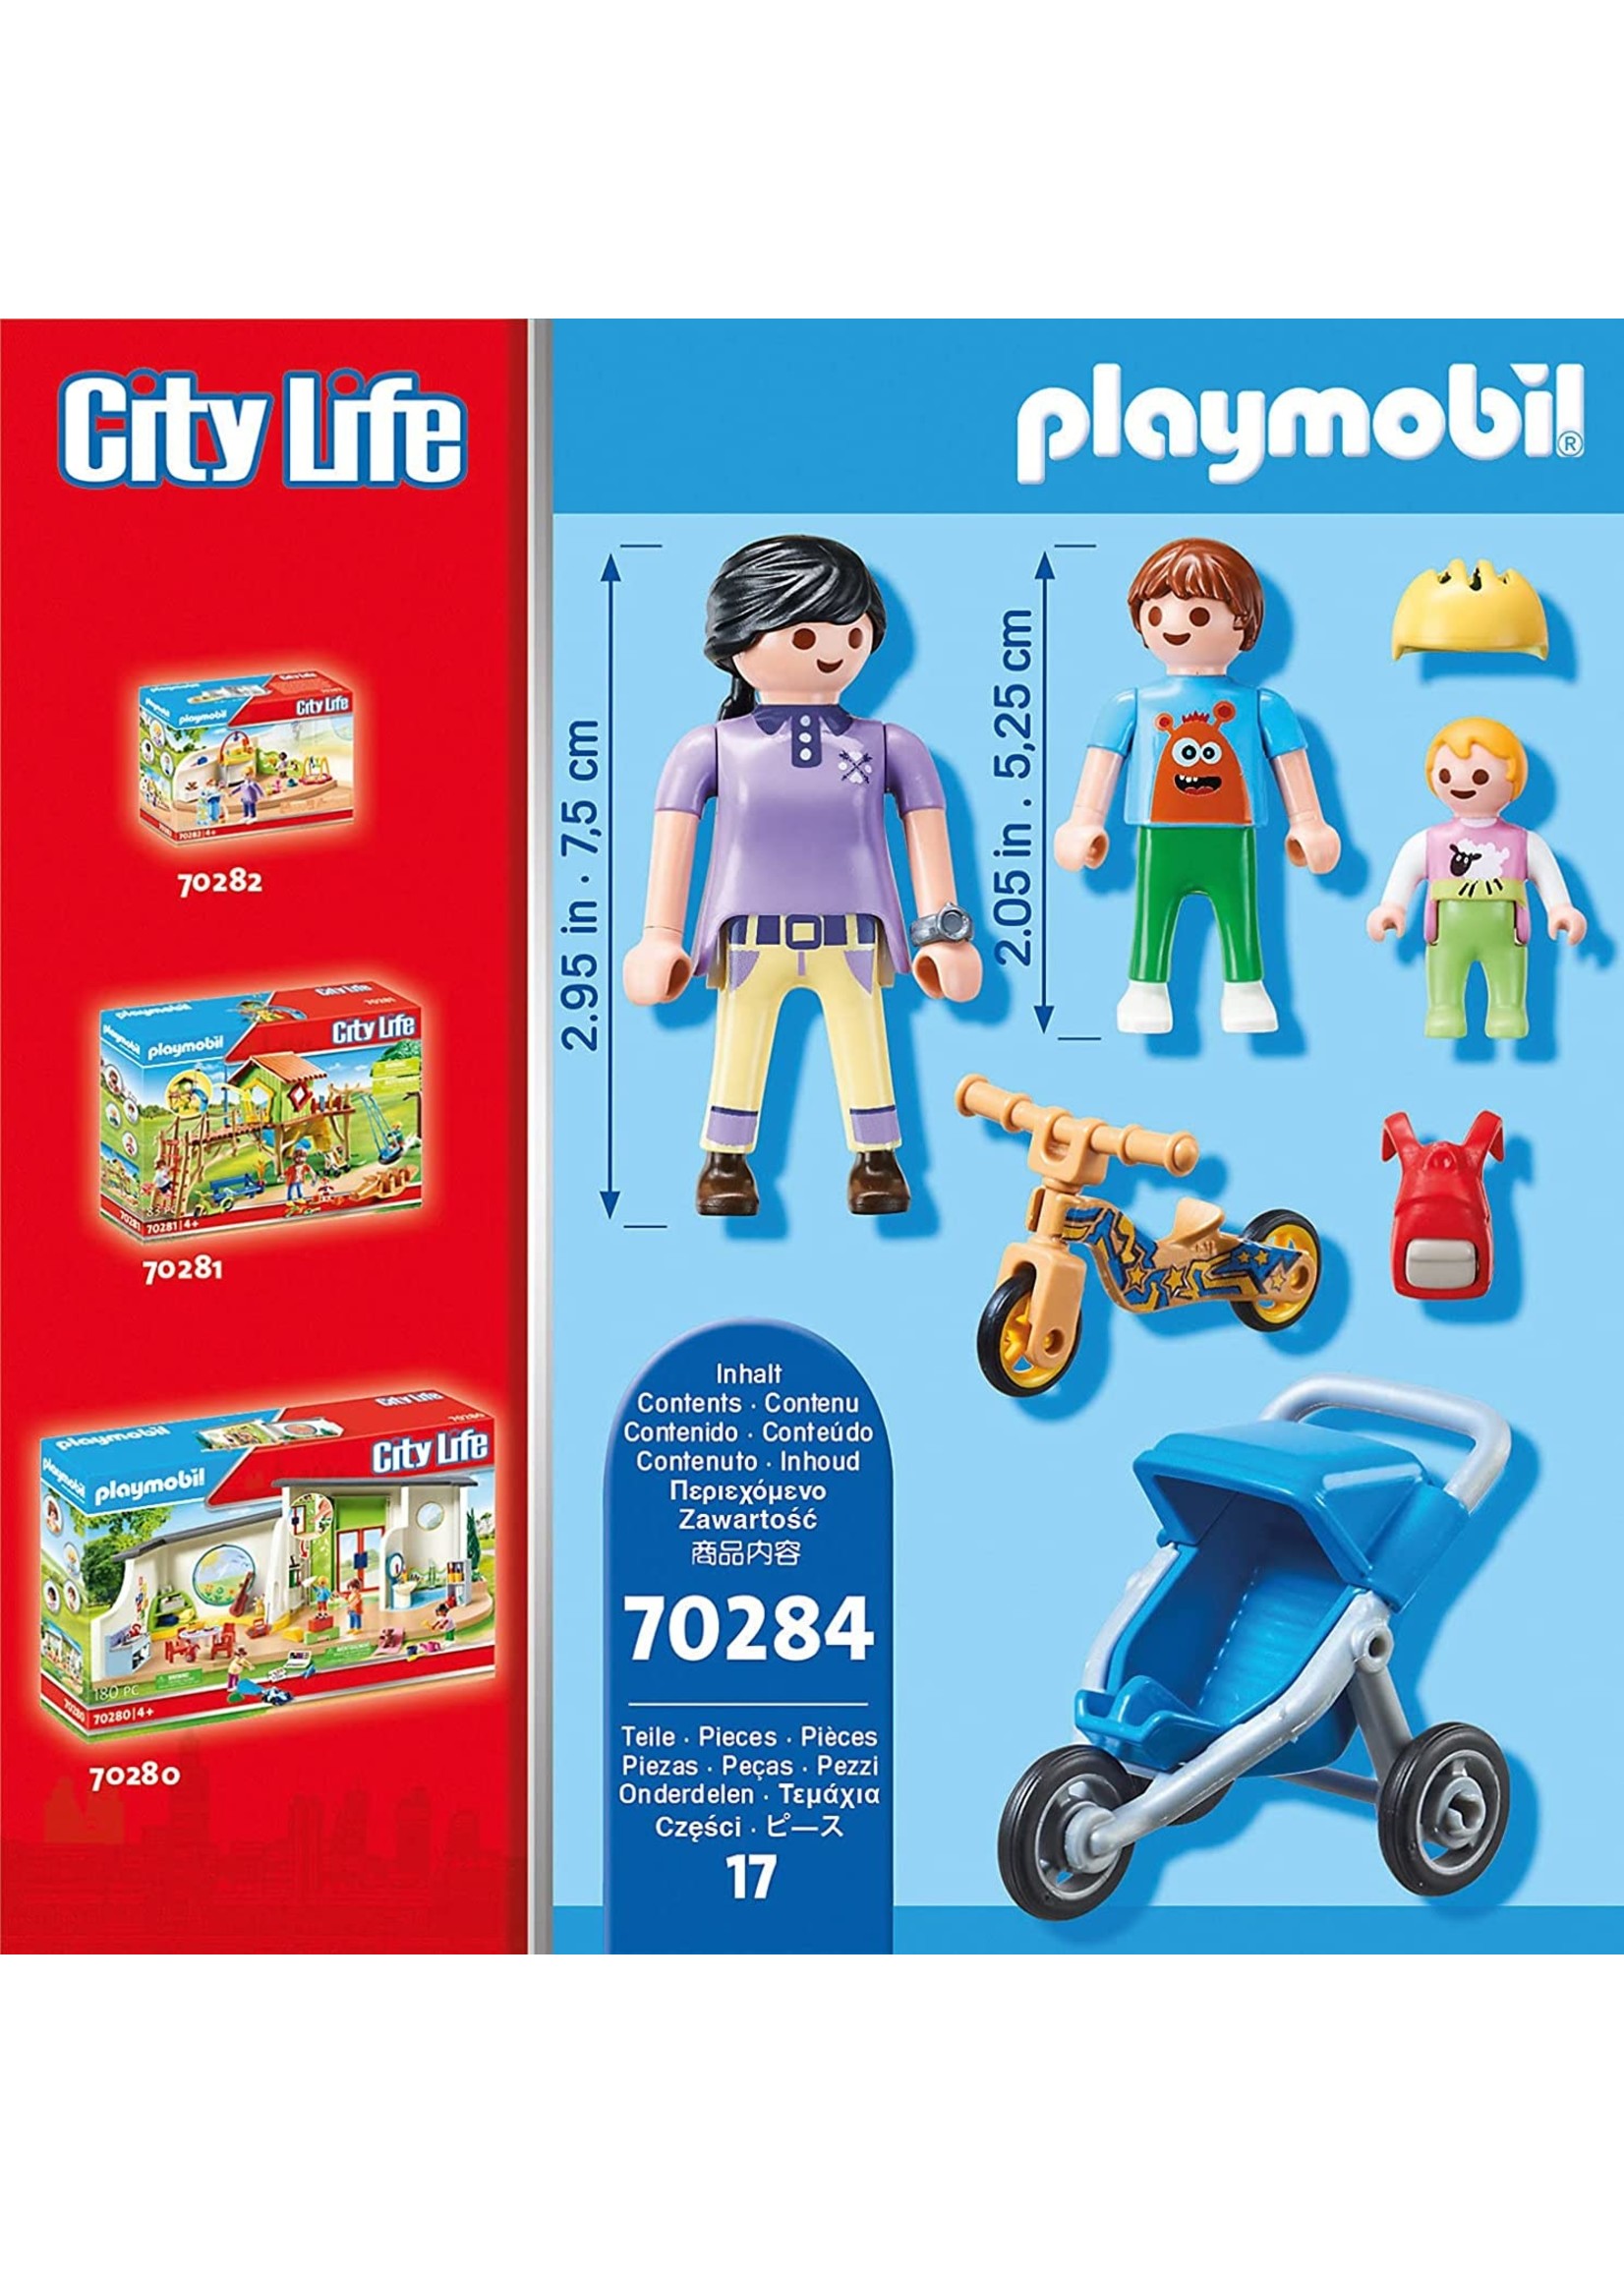 Playmobil Mother with Children